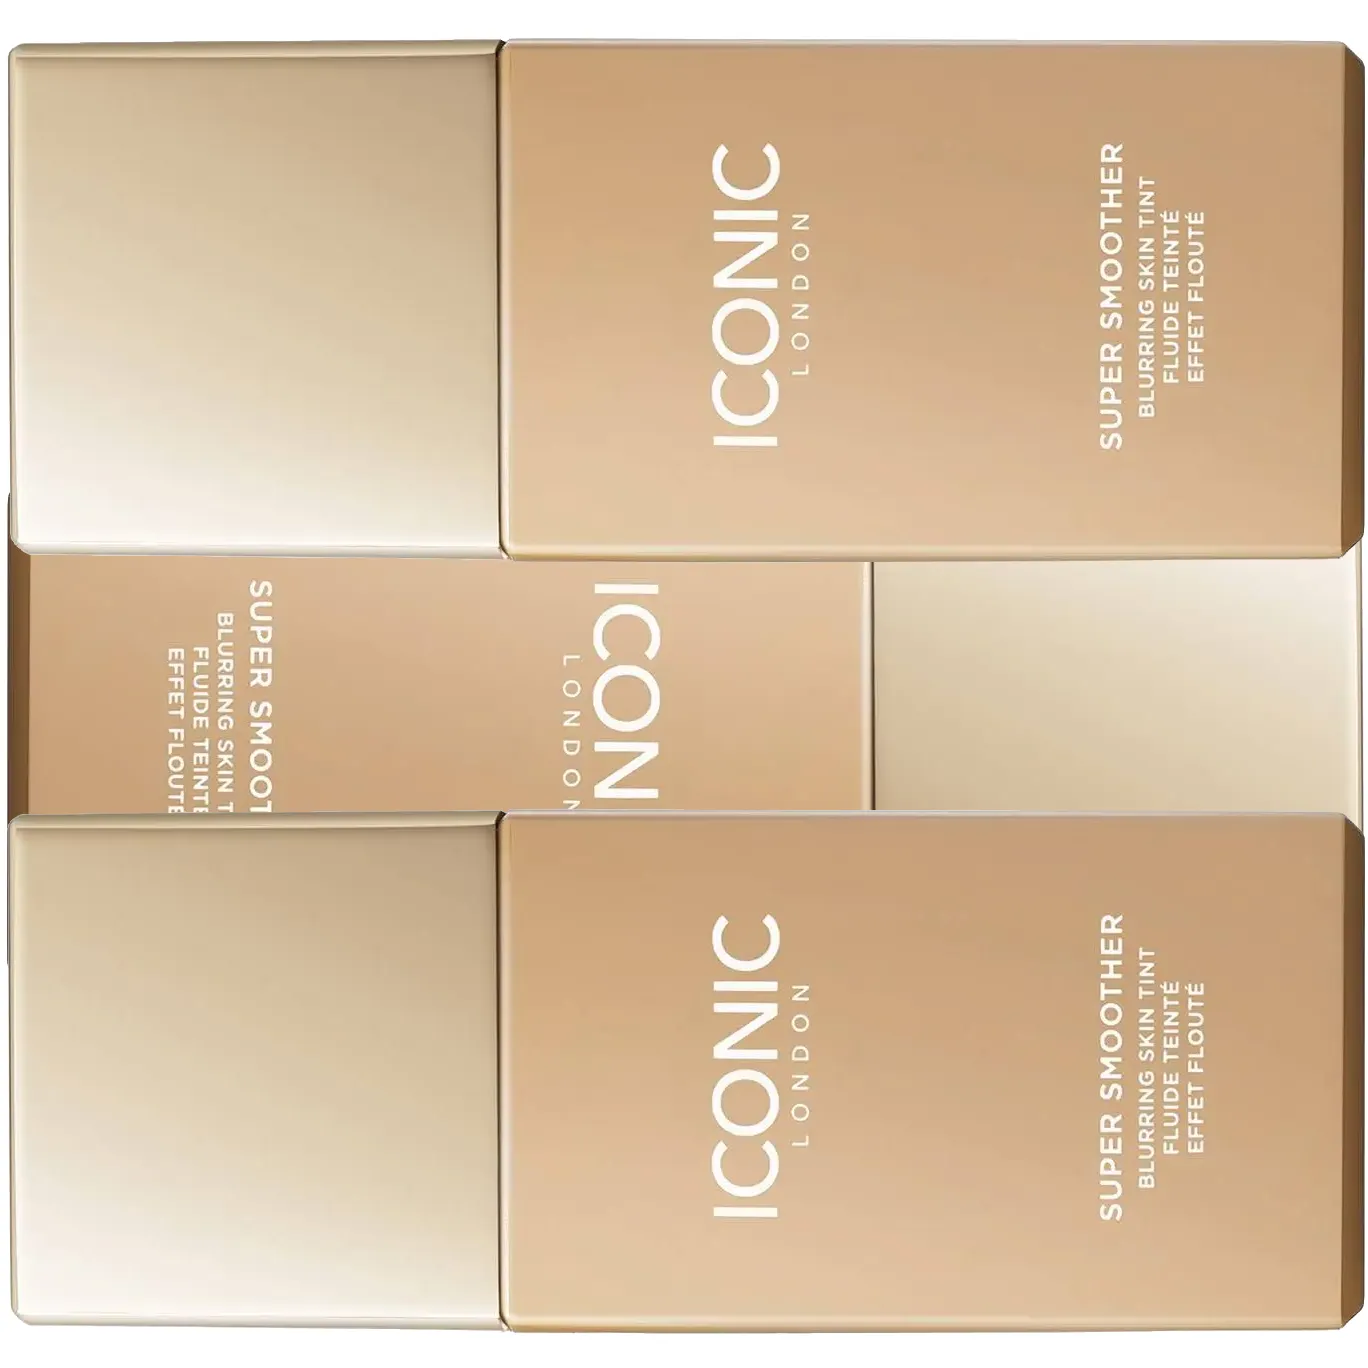 Free Iconic London Super Smoother Blurring Skin Tint